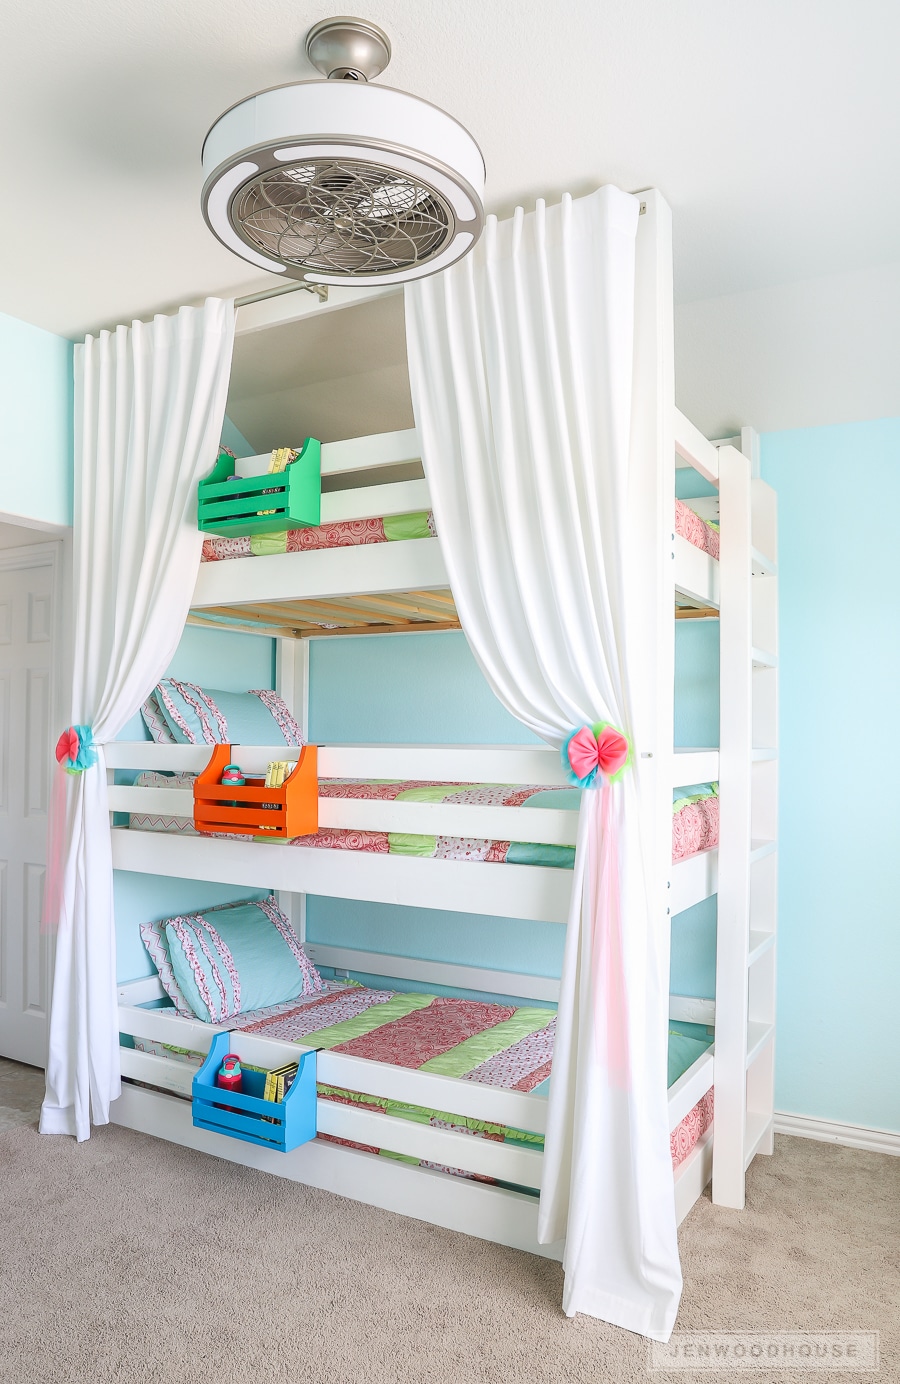 How To Build A Diy Triple Bunk Bed, Bunk Beds For Tall People